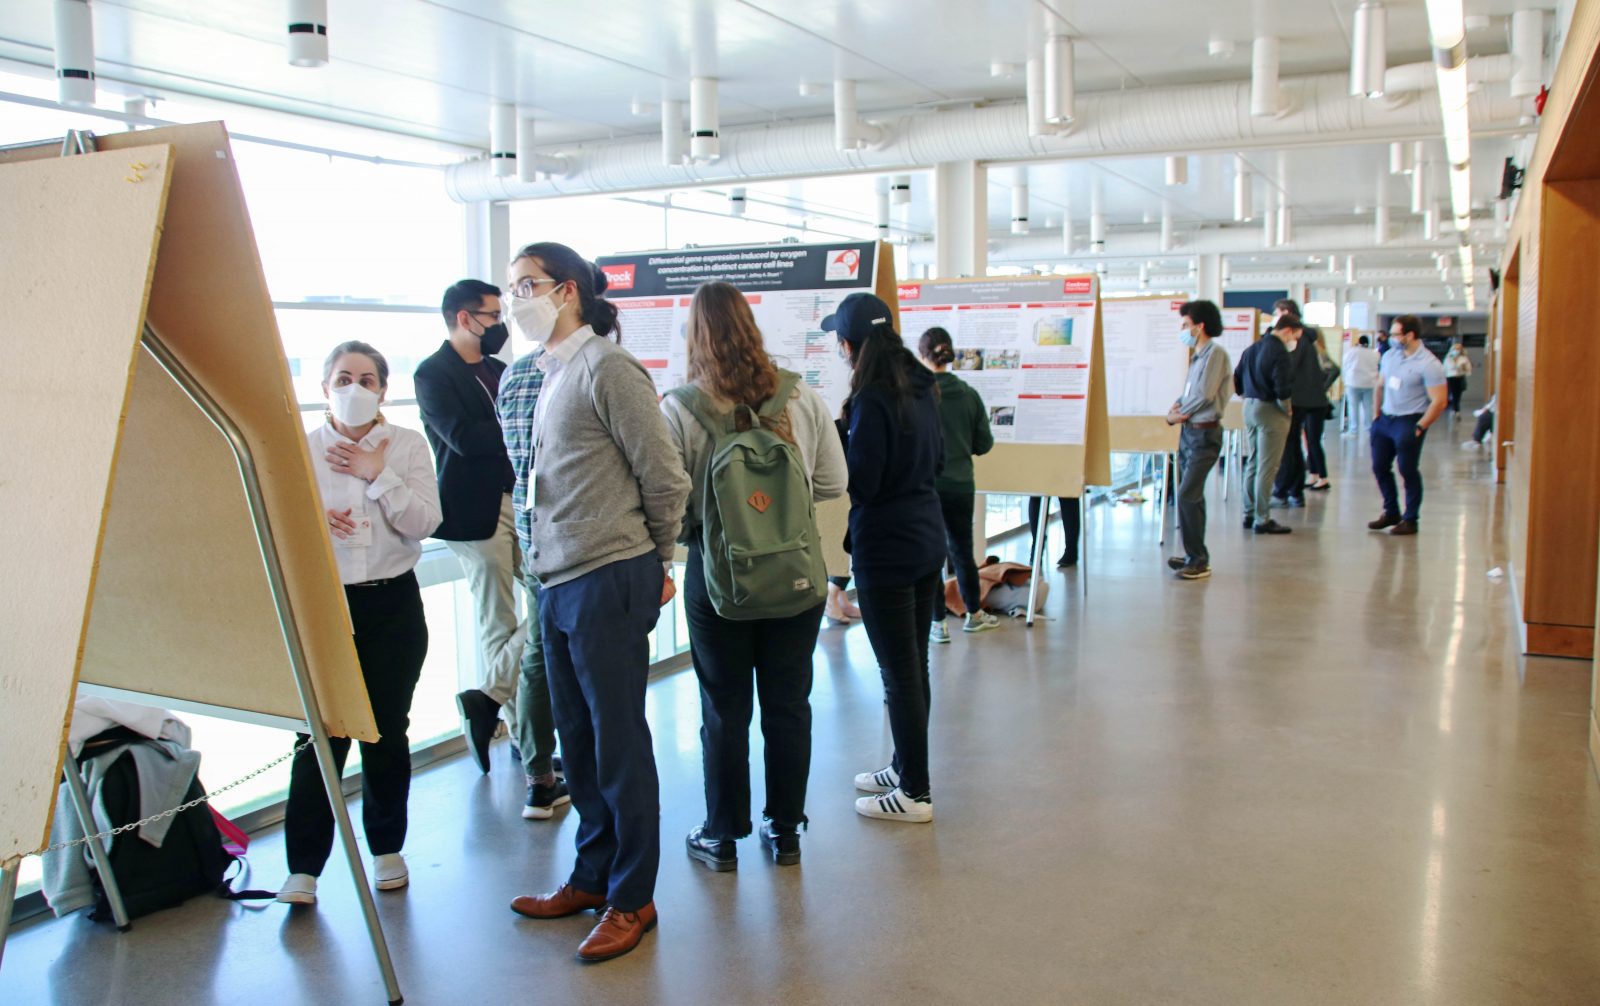 People stand in a university hallway looking at poster research presentations.